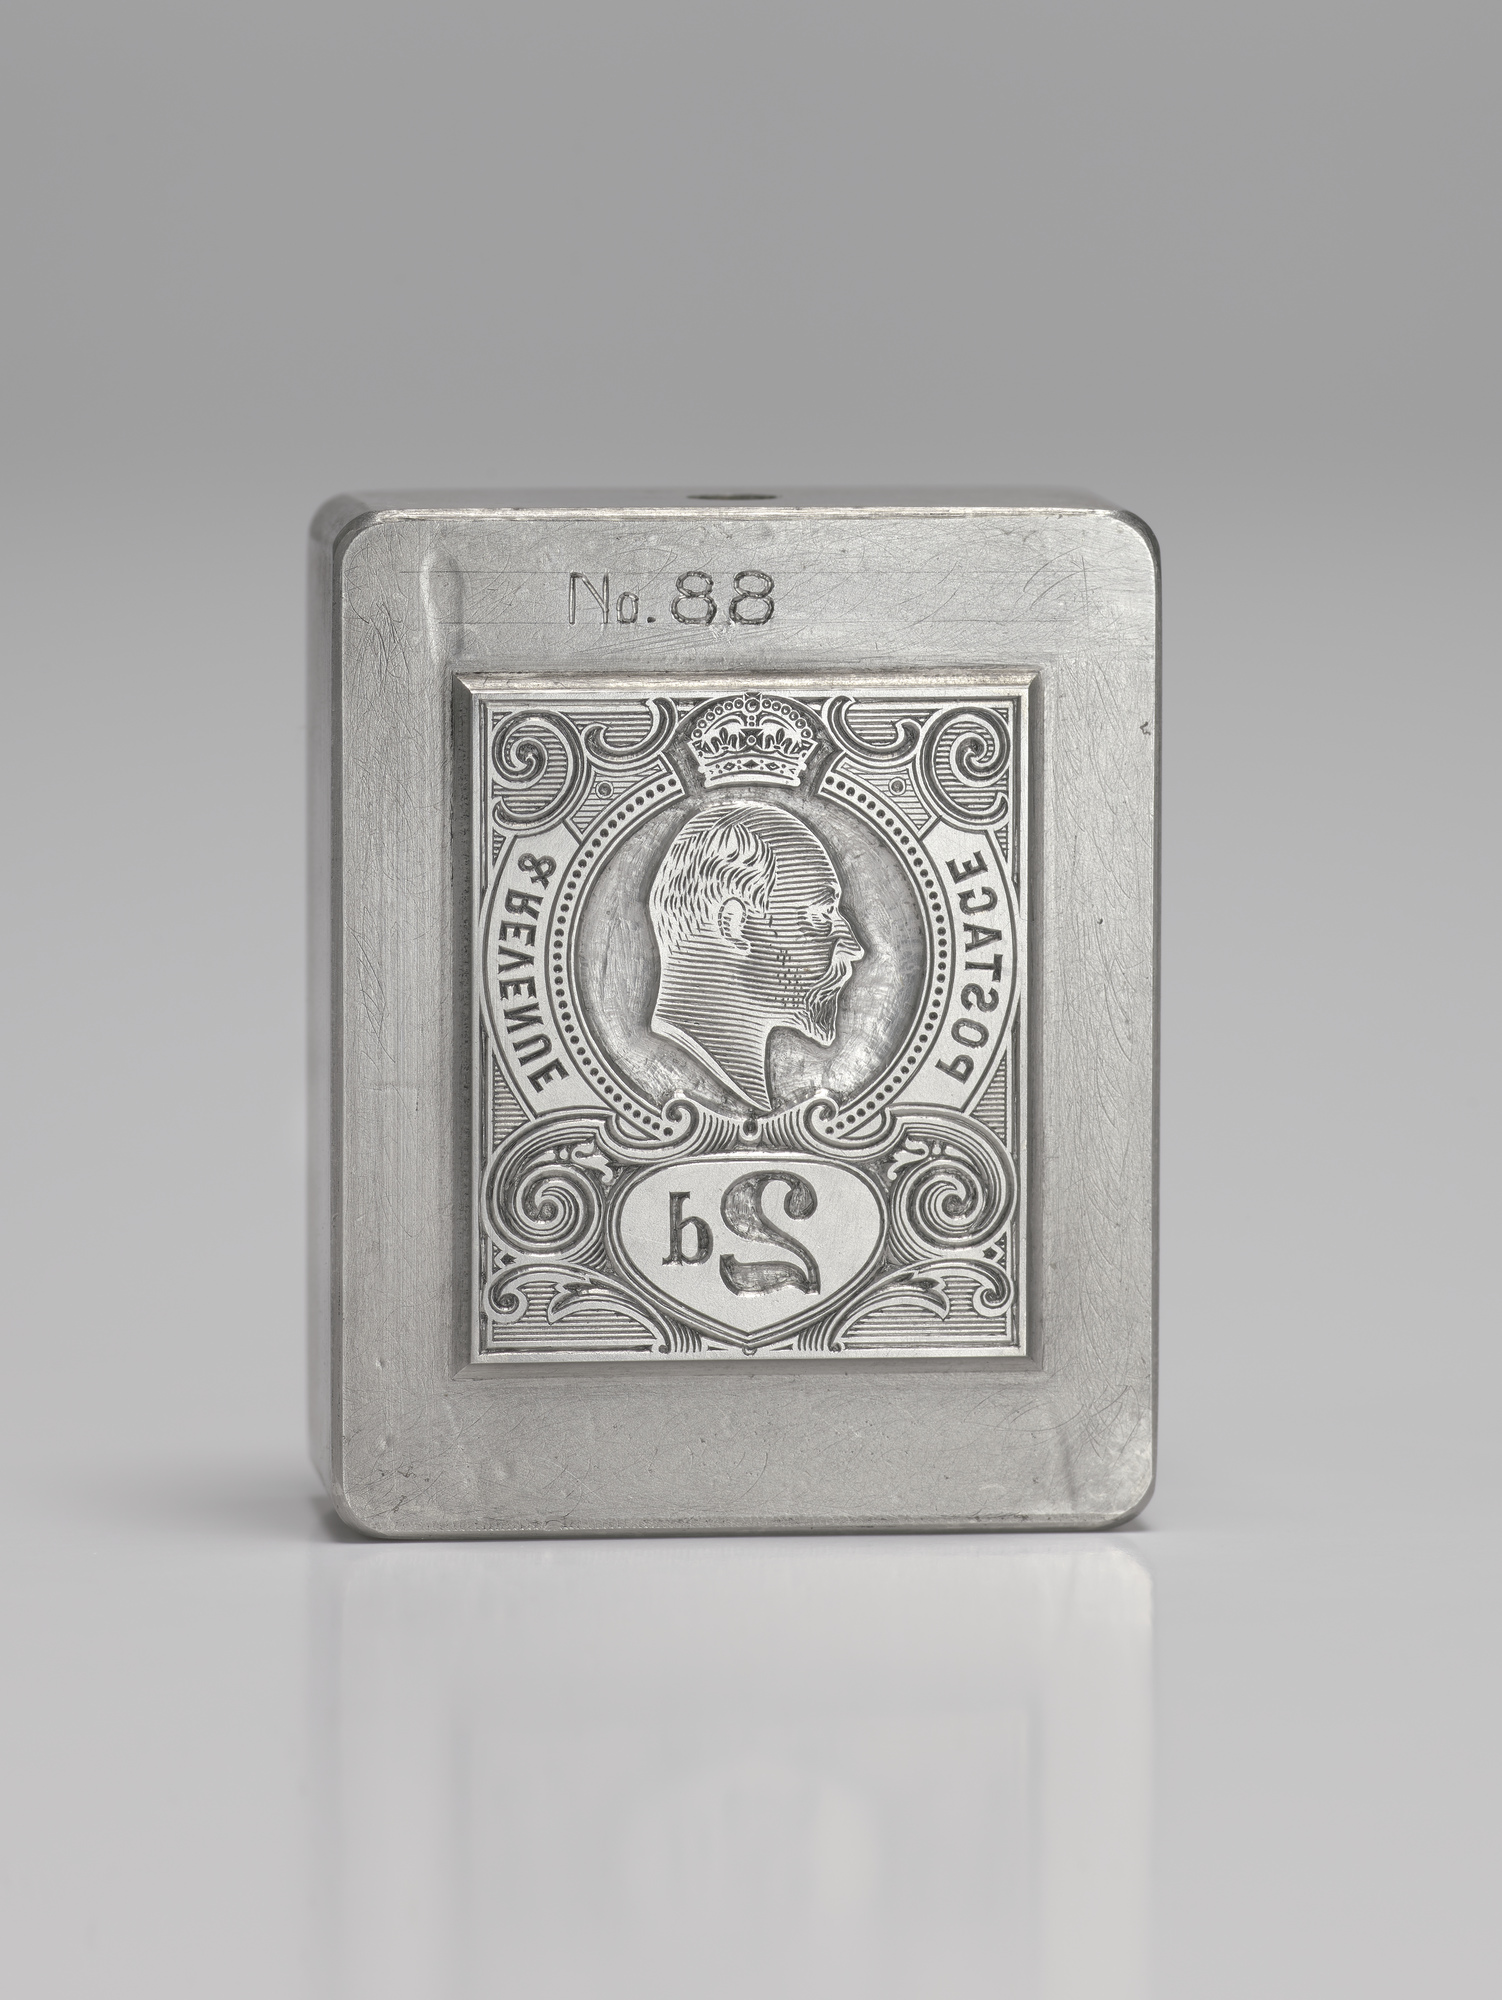 A metal die cube, showing a stamp design in reverse - an image of a king in a crown is in the middle, with the letters '2d' below this.